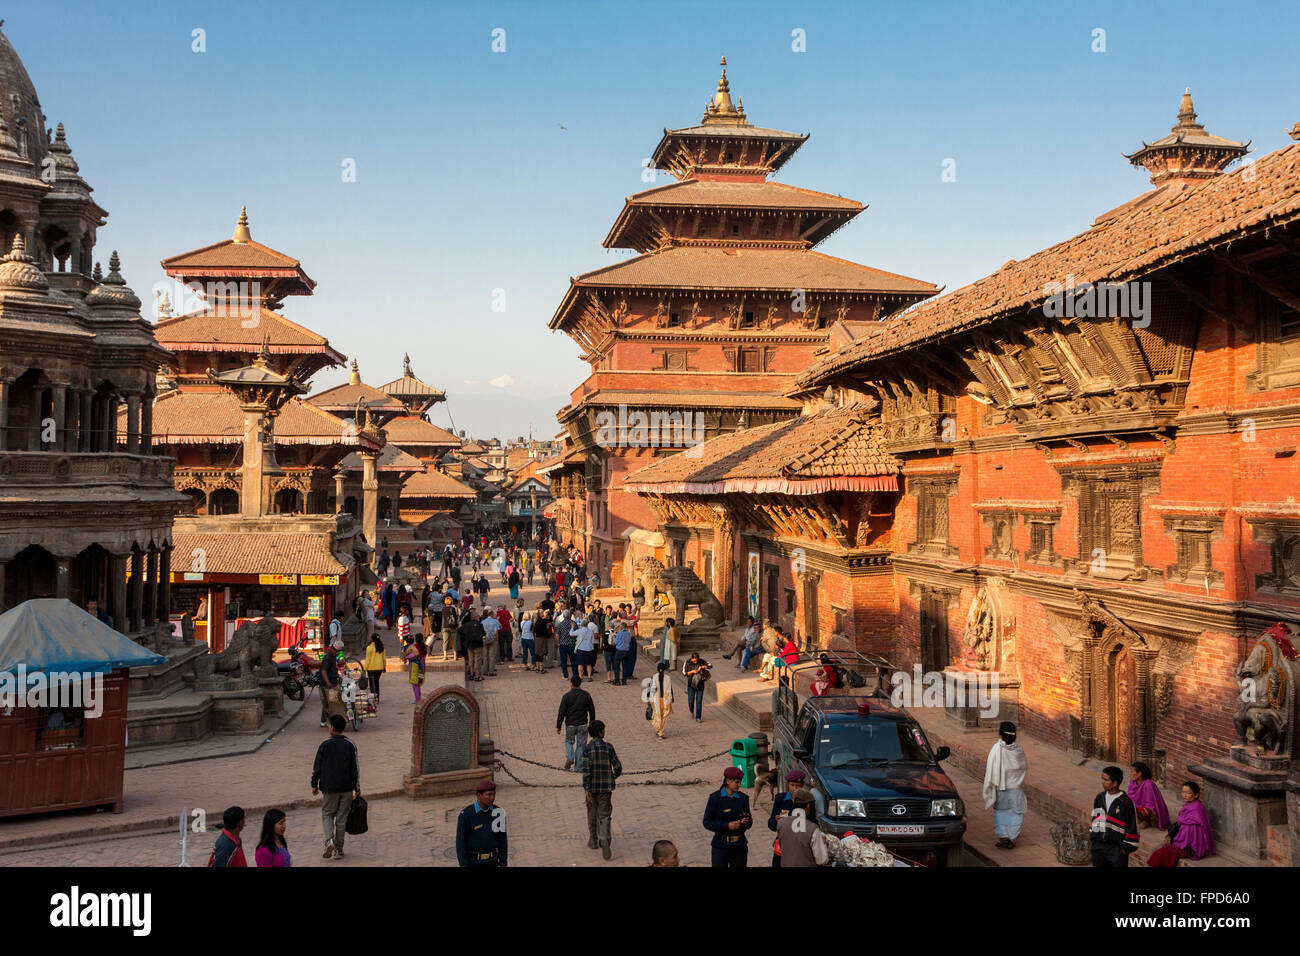 Nepal, Patan.  Entrance to Durbar Square, Royal Palace Tall Building on Right. Feb 19, 2009, prior to earthquake of April 2015. Stock Photo